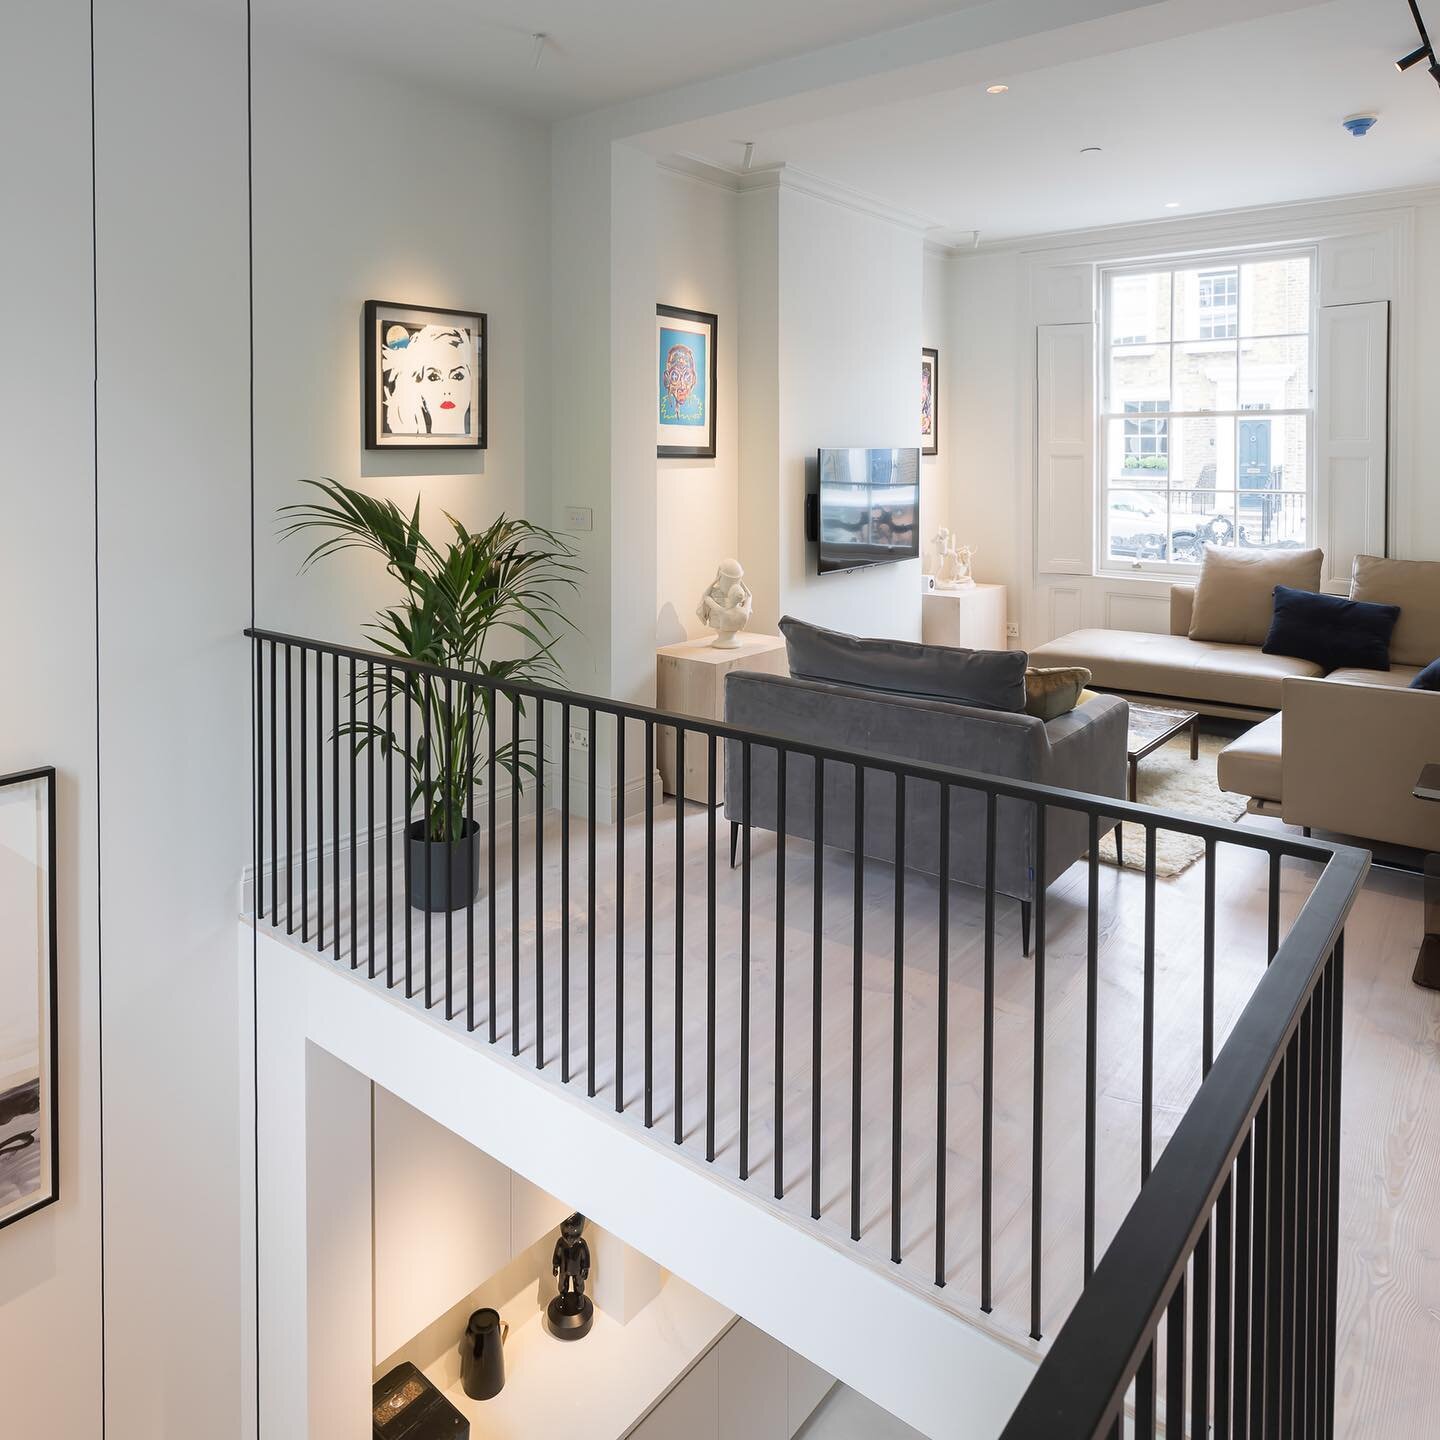 Double Height Dining Living : Islington 

#myhome #home #interiors #interior #interiordesign #interiorproject #refurb #renovation #homereno #londonreno #periodproperty #victorianterrace #victorianhome #myperiodinterior #victorianhouserennovation #hom